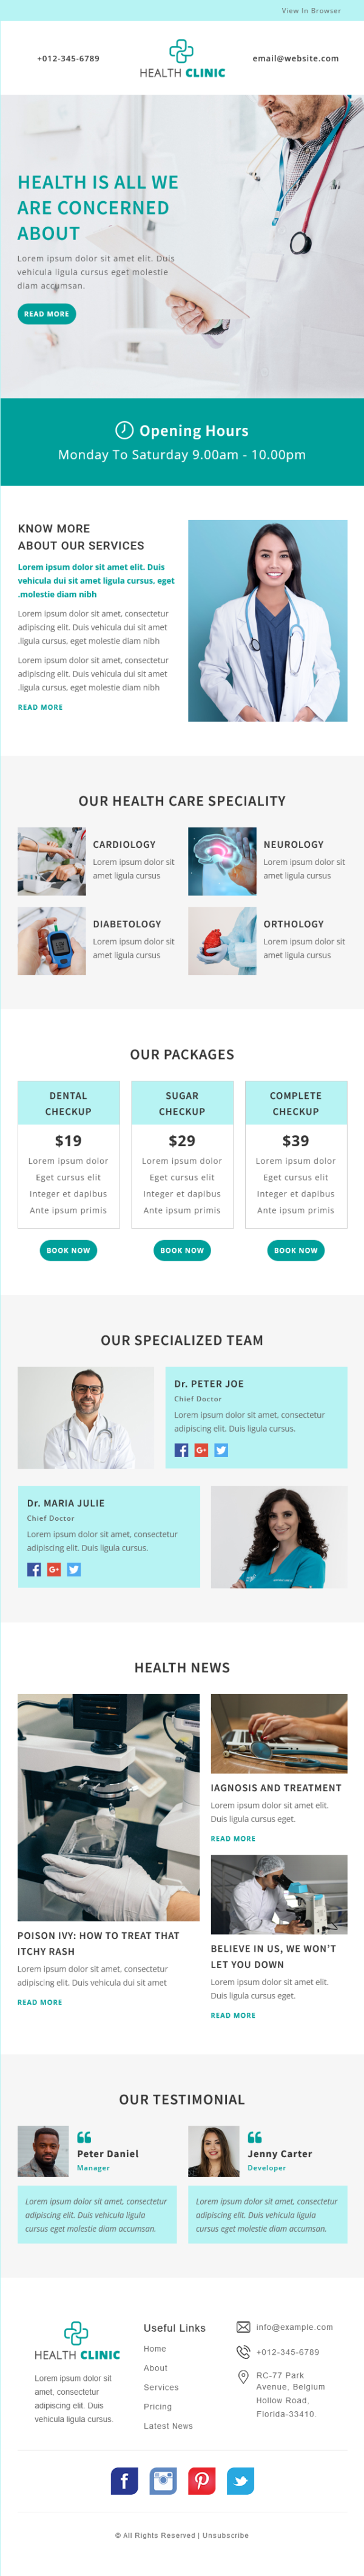 Health Clinic - Multipurpose Responsive Email Template